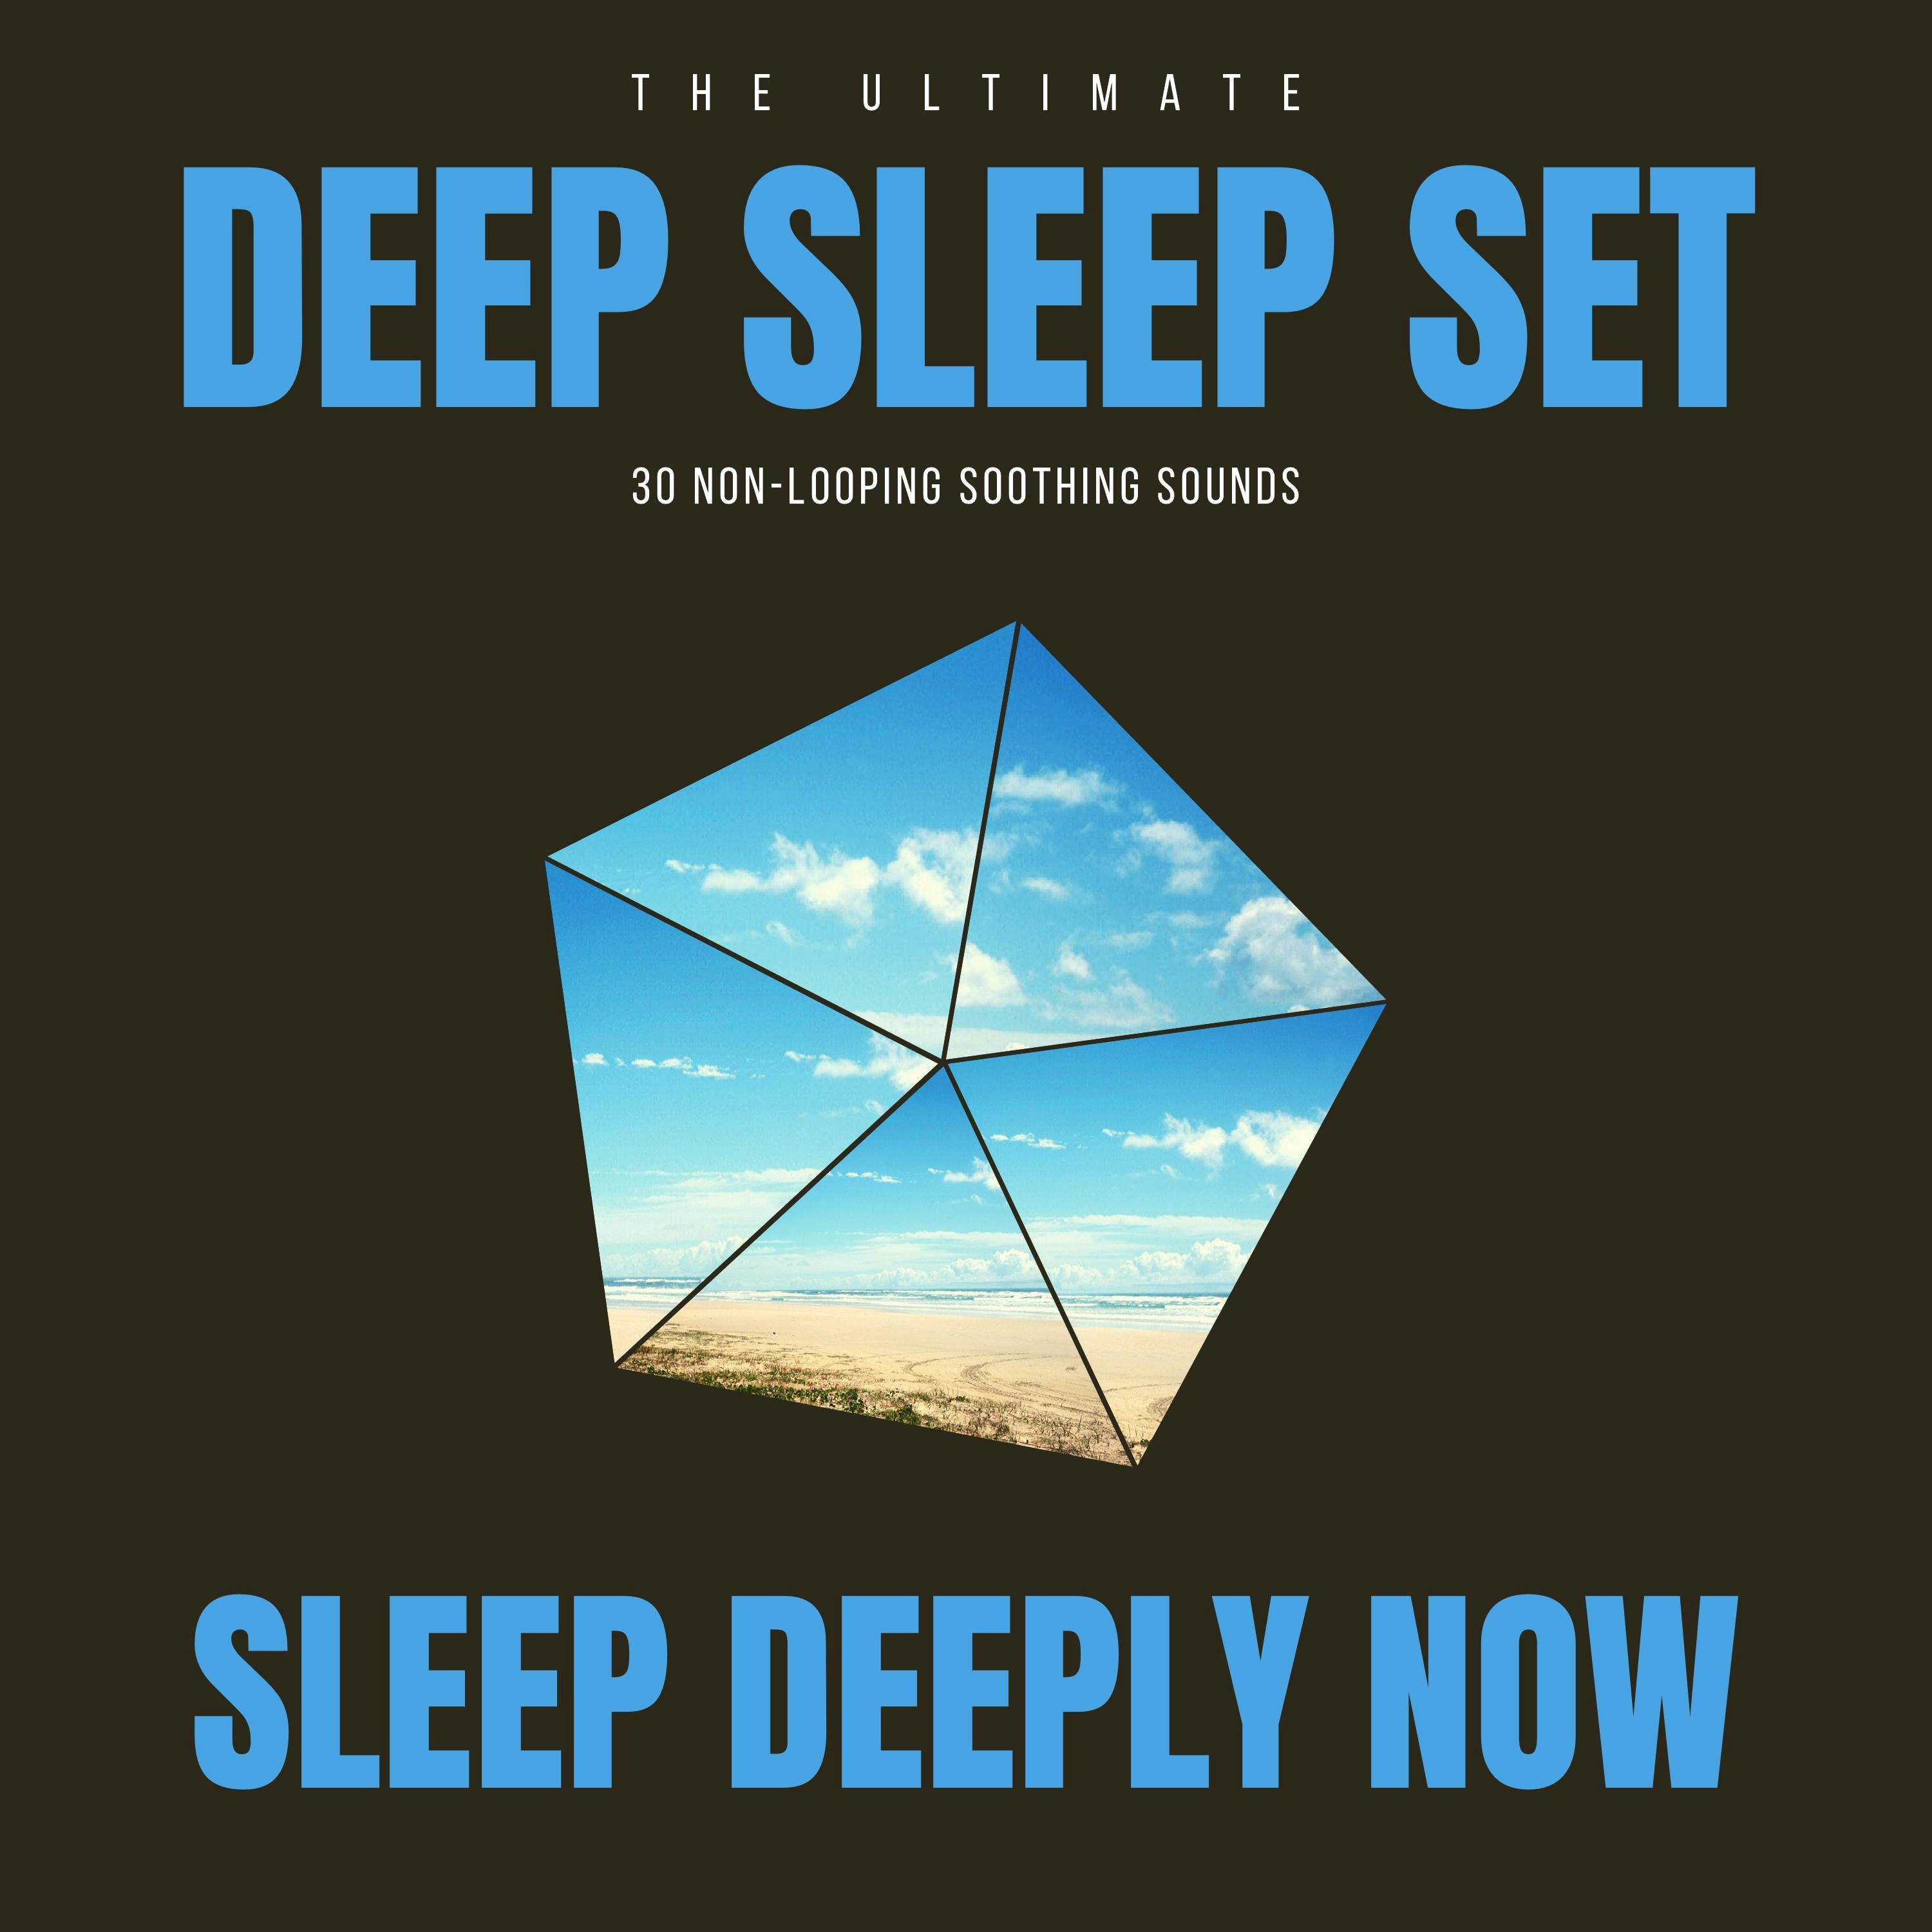 Deep Sleep Set: 30 Non-Looping Soothing Sounds: Sleep Deeply Now - undefined